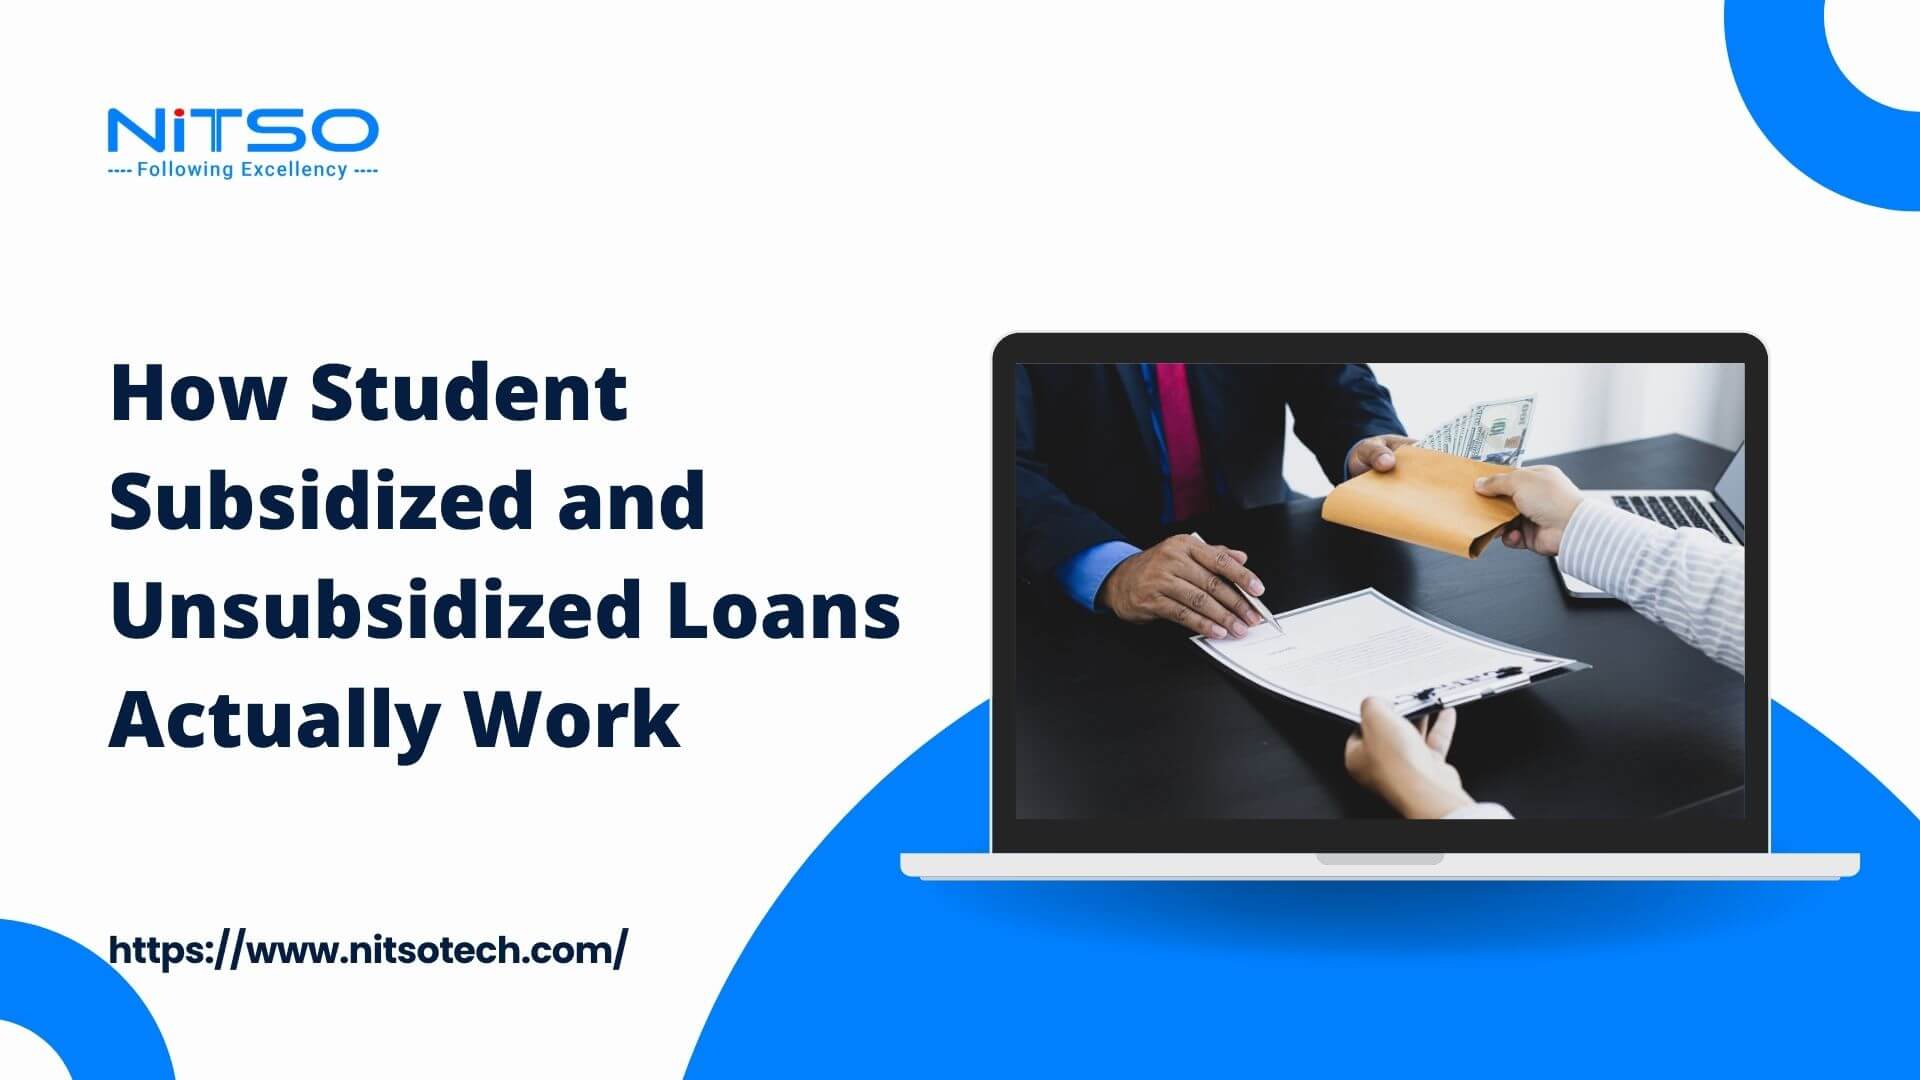 How Student Subsidized and Unsubsidized Loans Actually Work